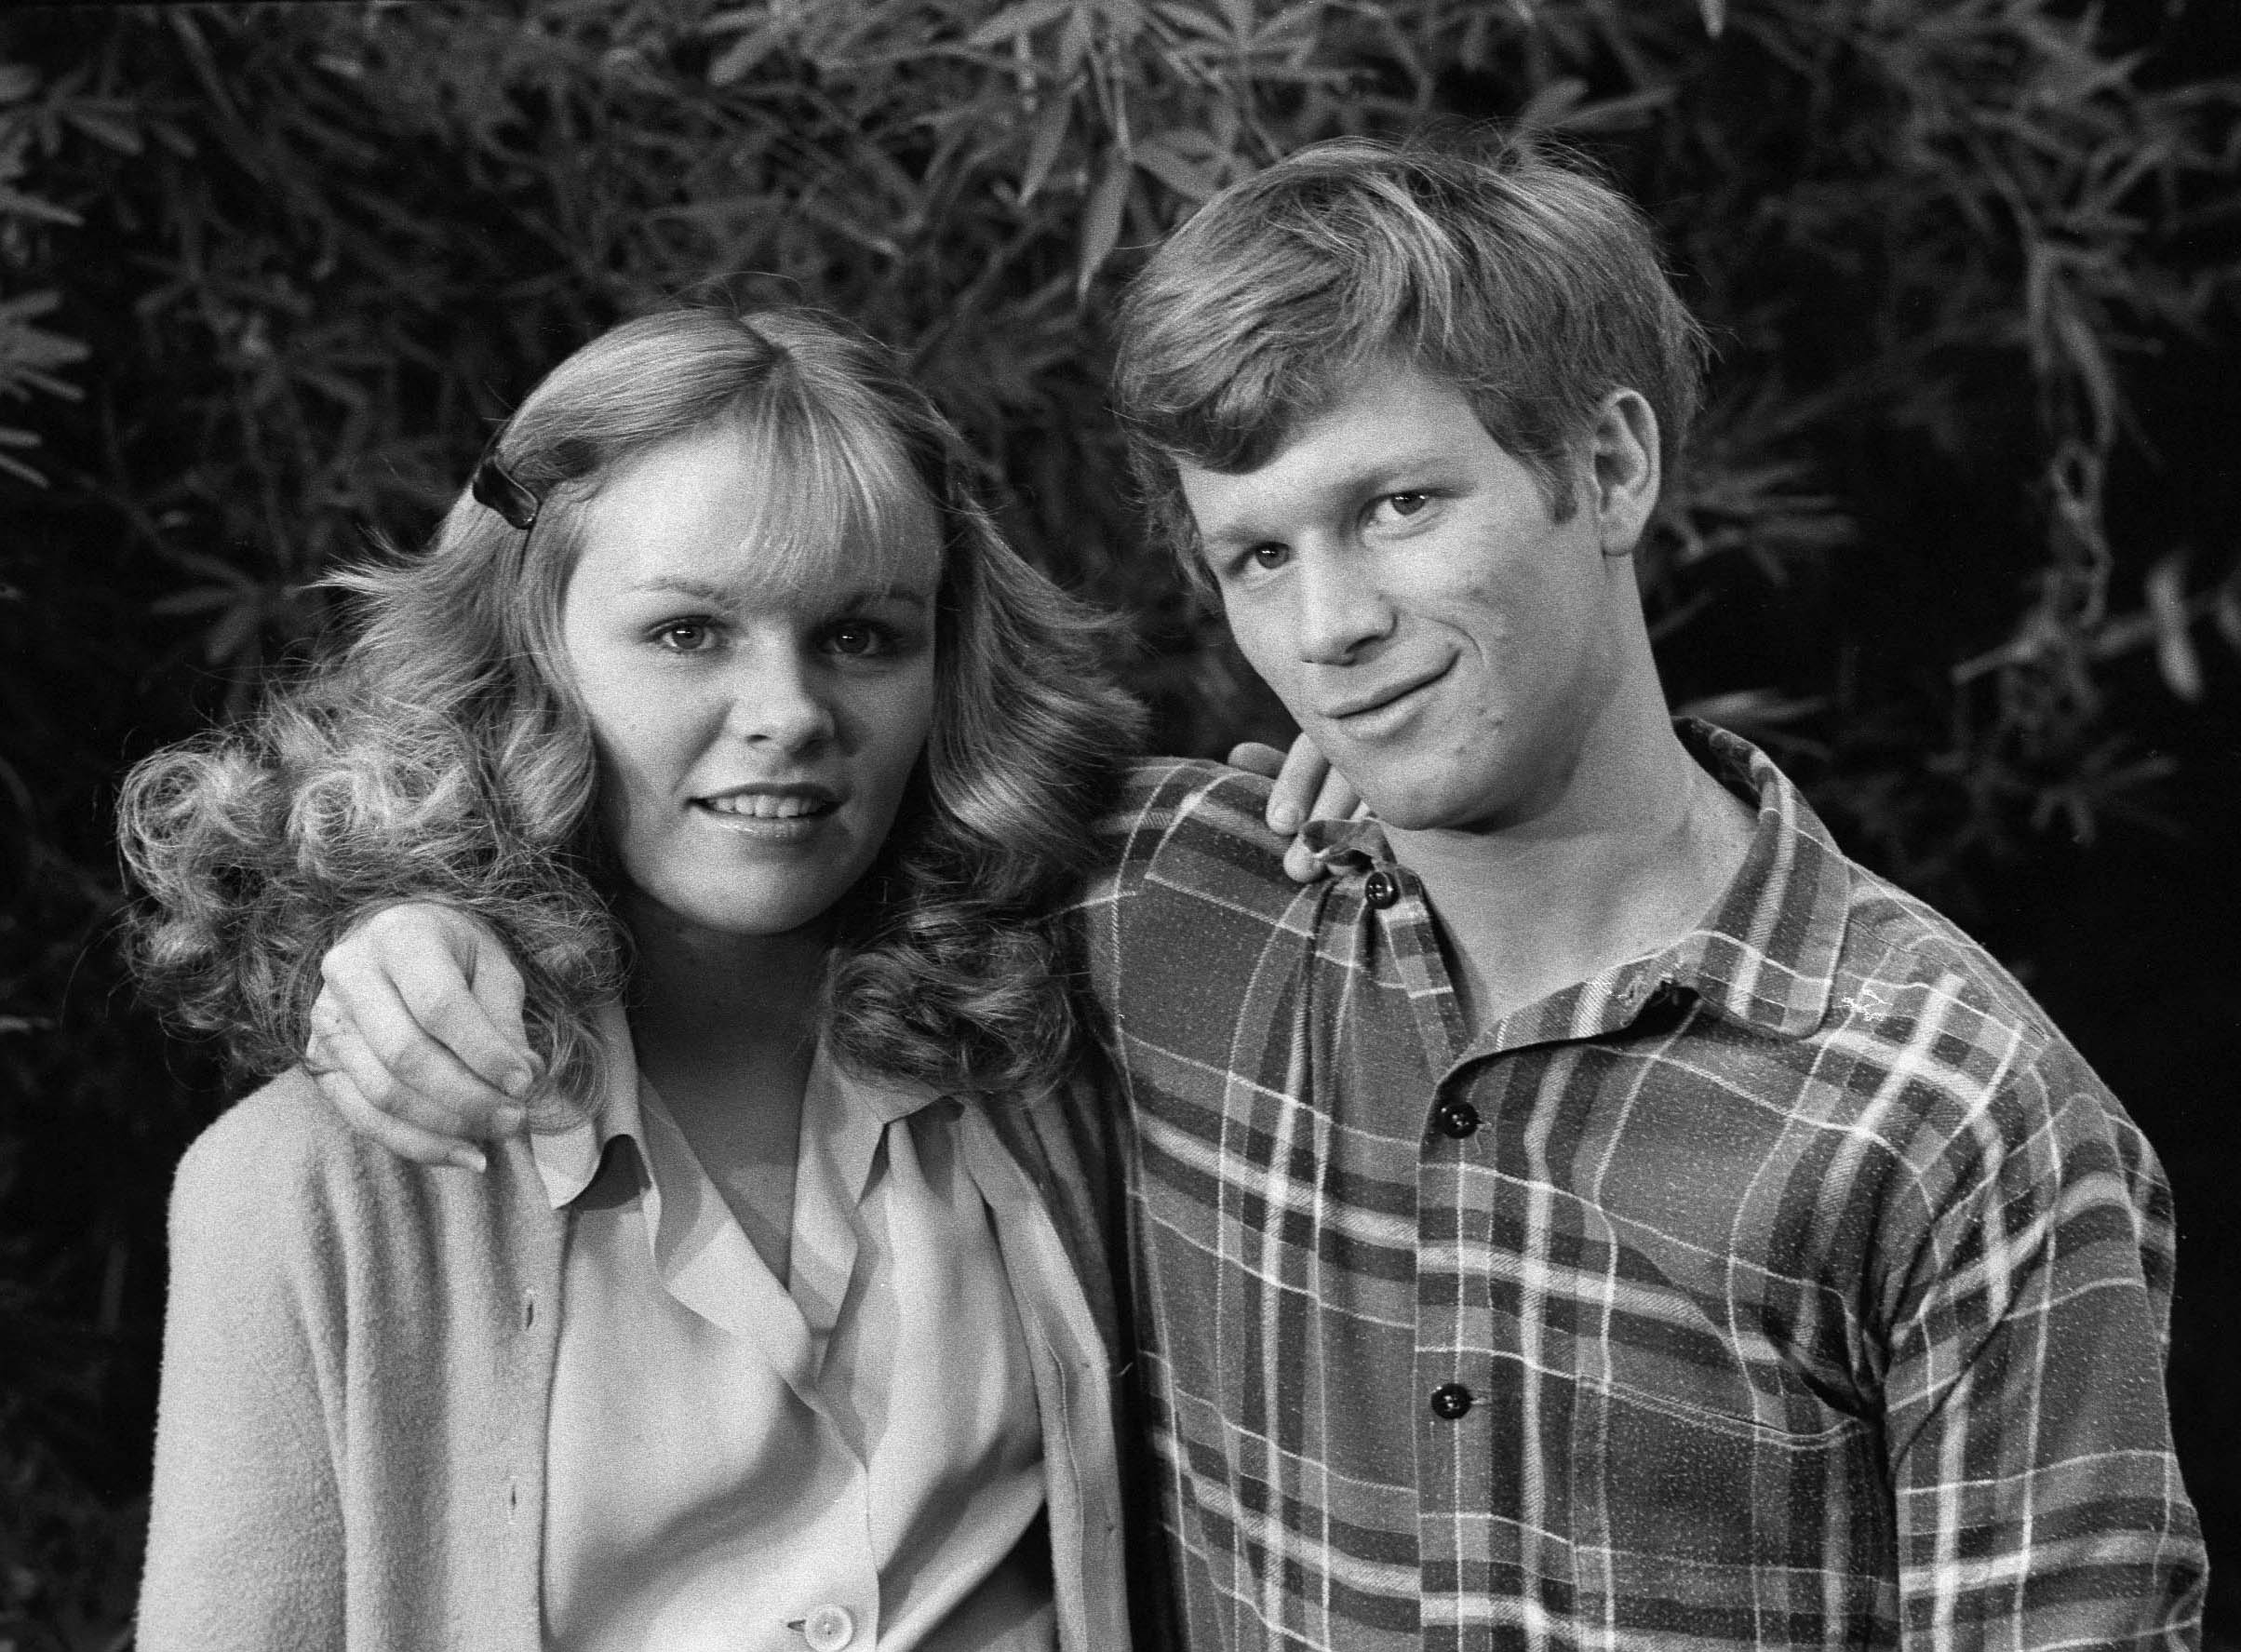 Black and white photo of 'The Waltons' cast member Eric Scott with his arm around Debbie Gunn